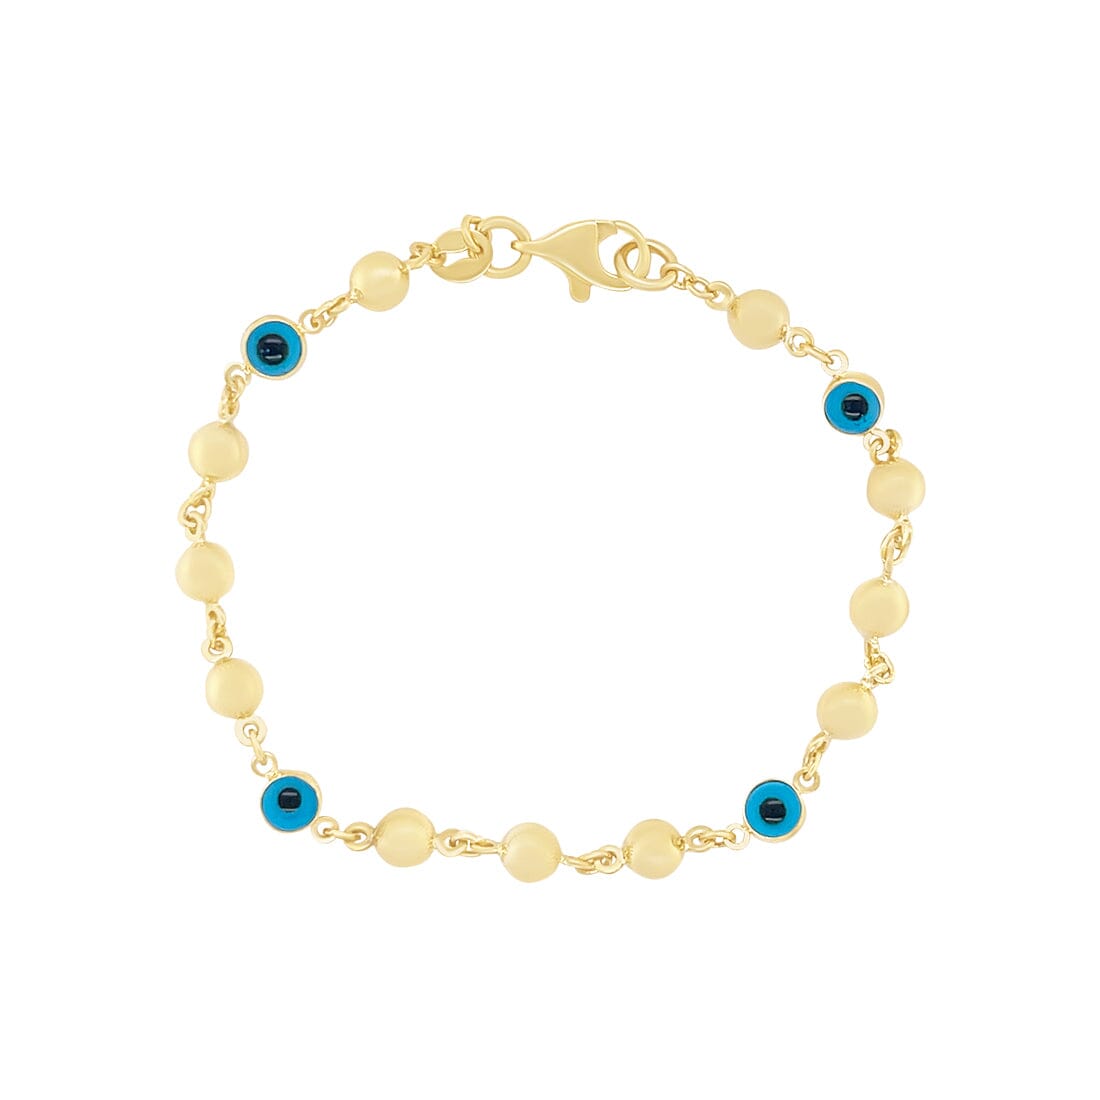 Children's Ball Bracelet with Evil Eyes in 9ct Yellow Gold Silver Infused Bracelets Bevilles 